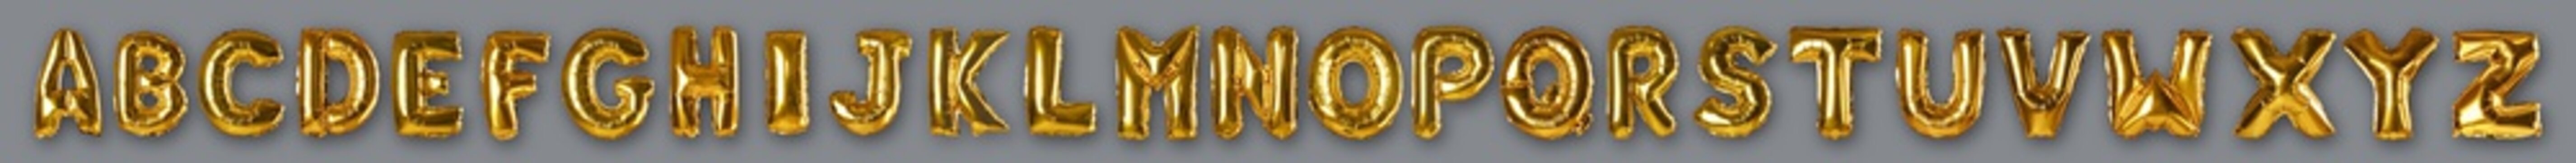 Set with golden foil balloons in shape of letters on grey background